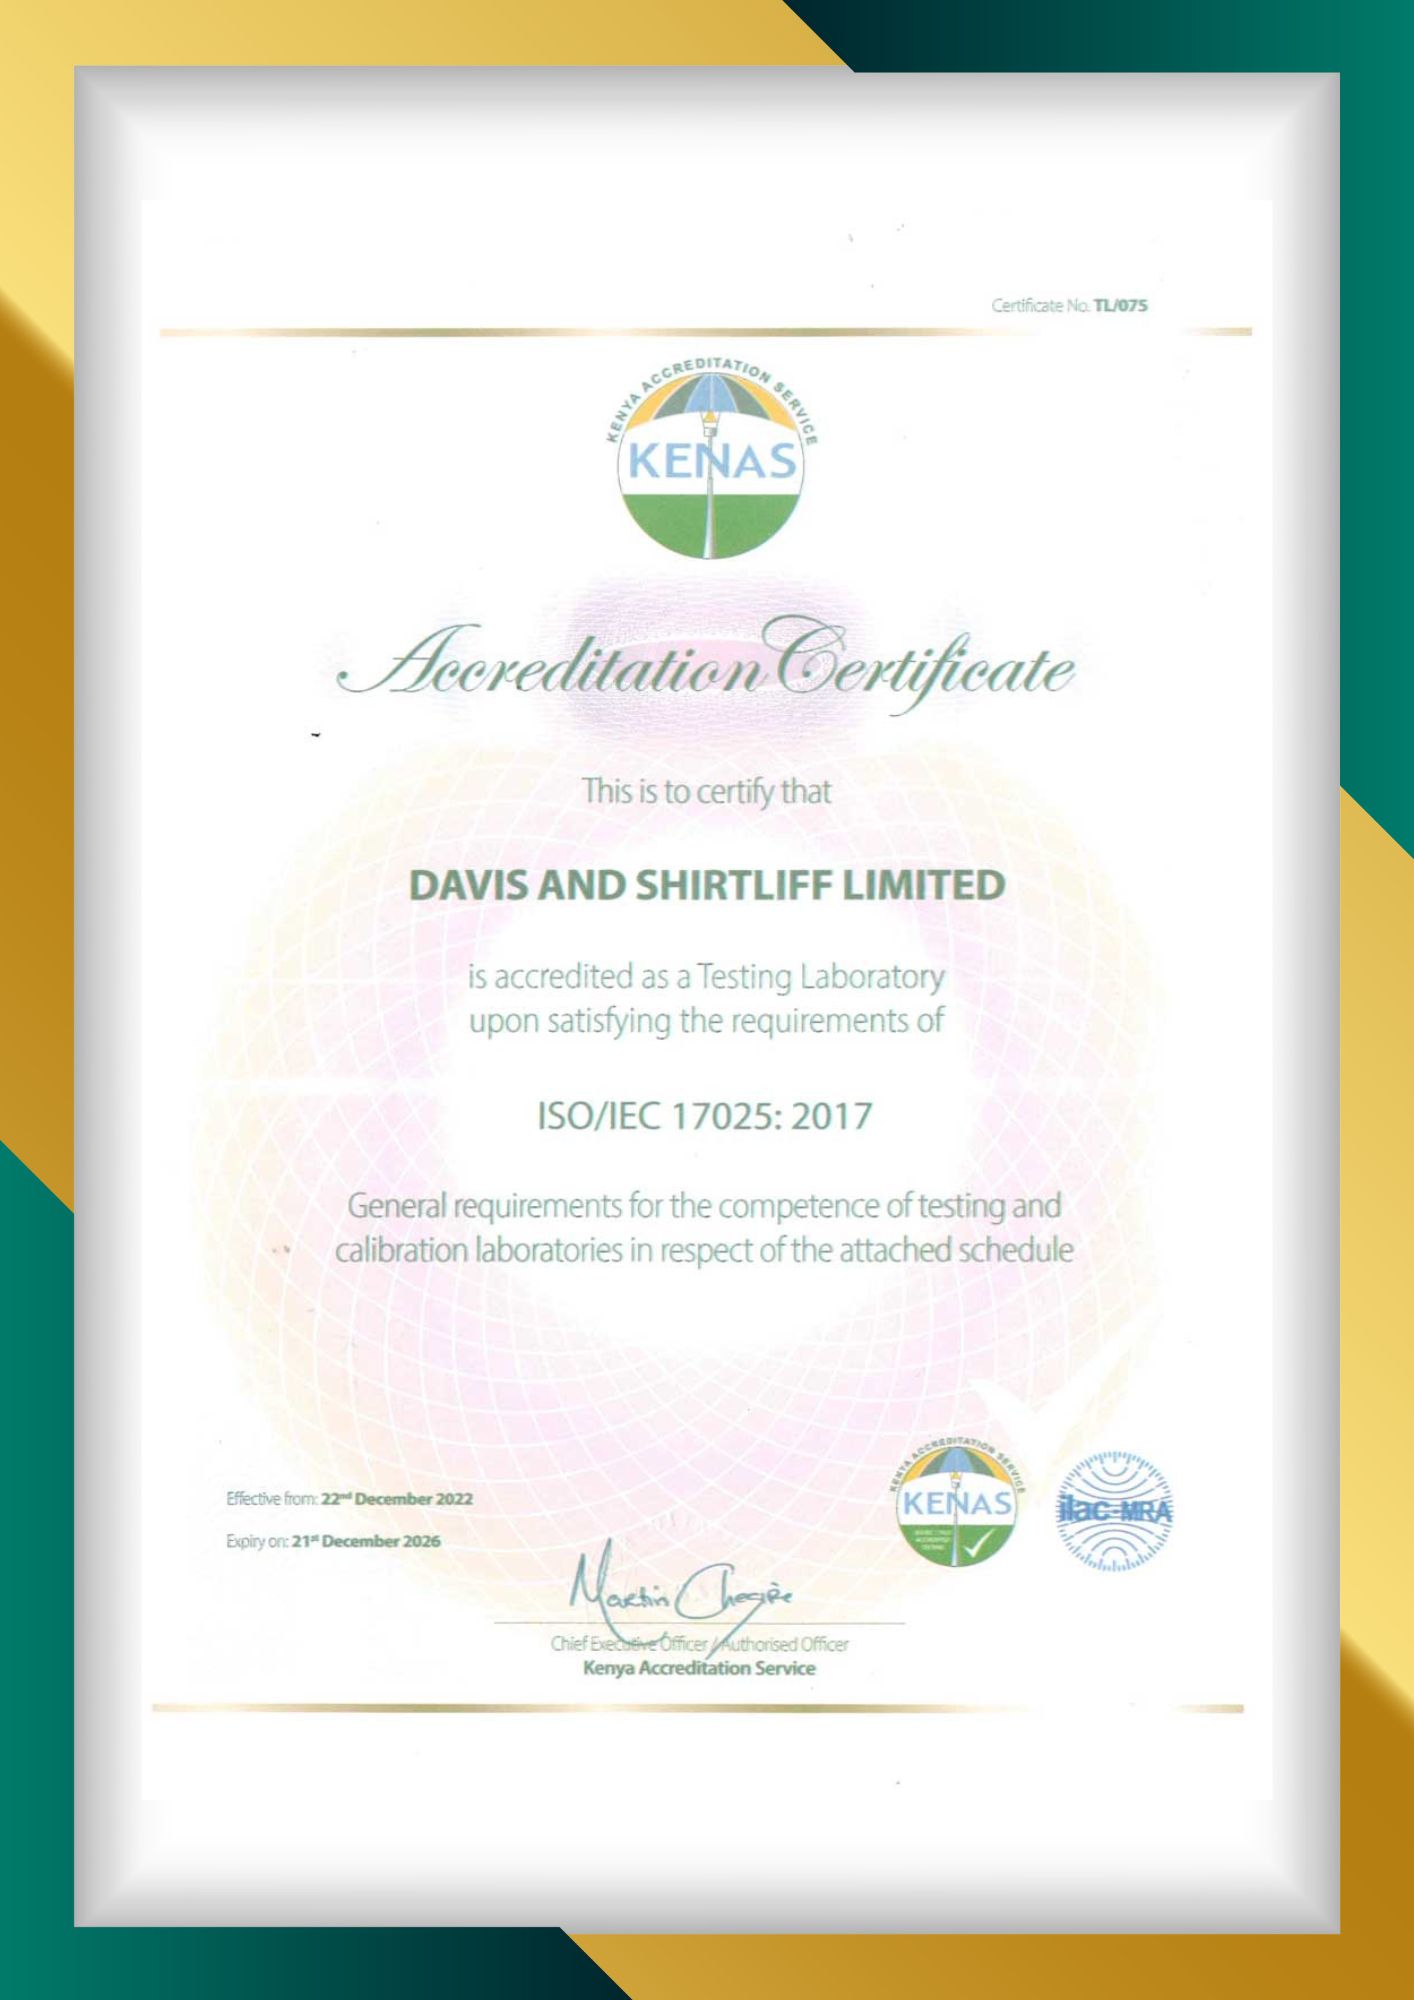 Davis & Shirtliff are now ISO certified